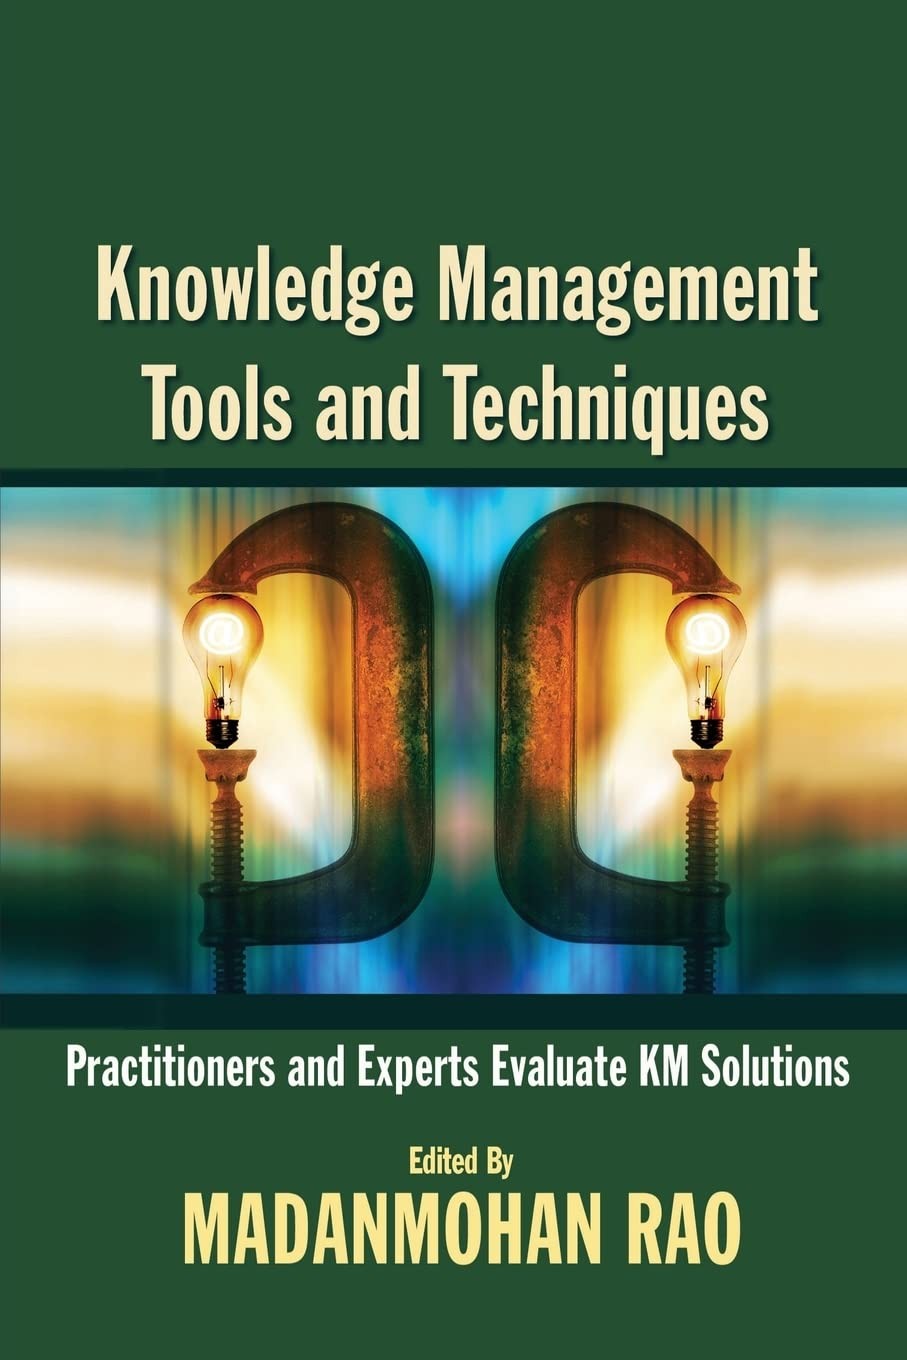 Knowledge Manage Tools & Techniques